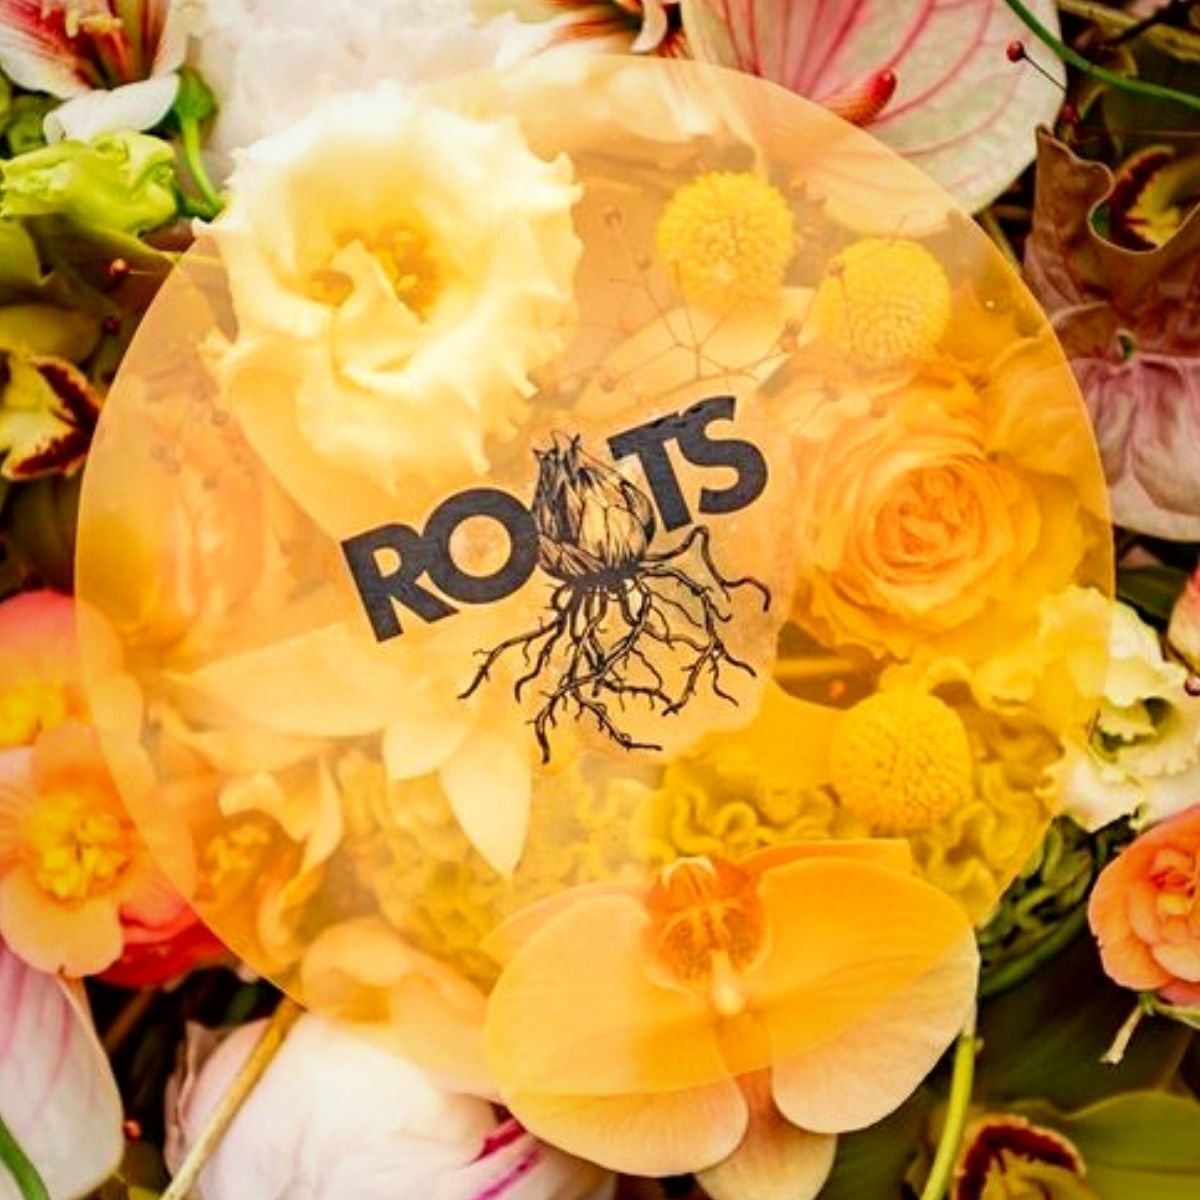 marginpar-giveaway-two-general-registration-tickets-for-roots-floral-education-symposium-in-las-vegas-from-4-to-9-july-2022-featured